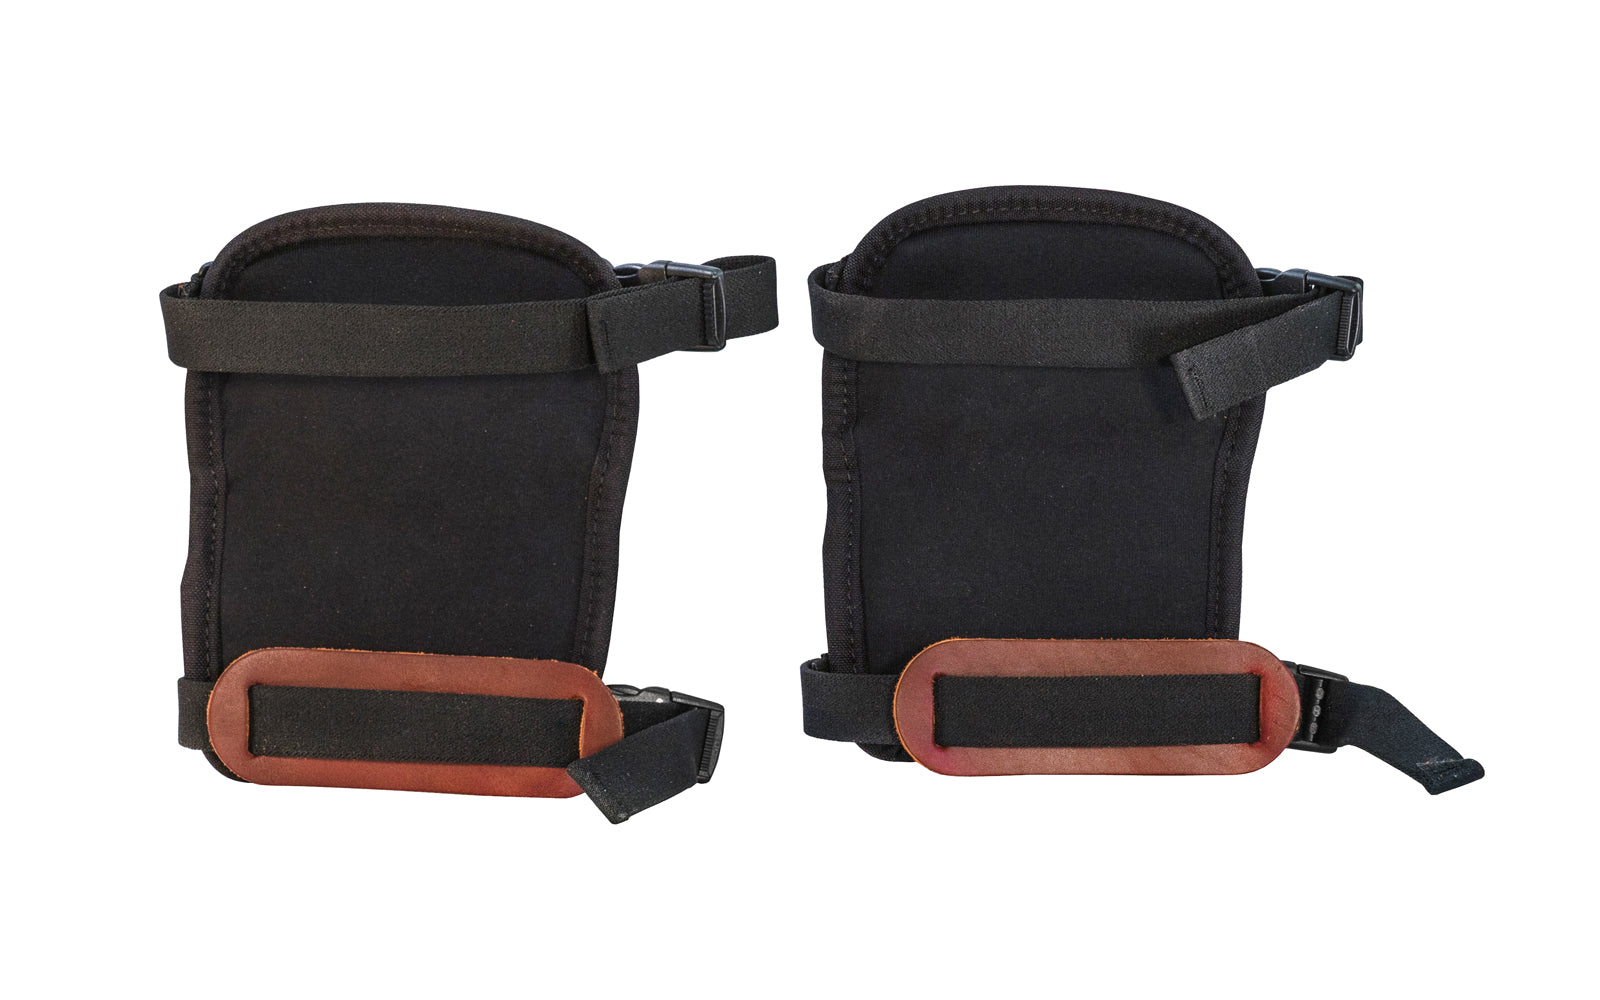 Occidental Leather's comfortable knee pads are made of top-grain leather for professionals. Won’t scuff floors & are great for interior & remodeling work. Hand crafted with a thick layer of high density padding & an inner plastic shield to eliminate pressure points. Quick release fasteners. Made in USA - Model 5022